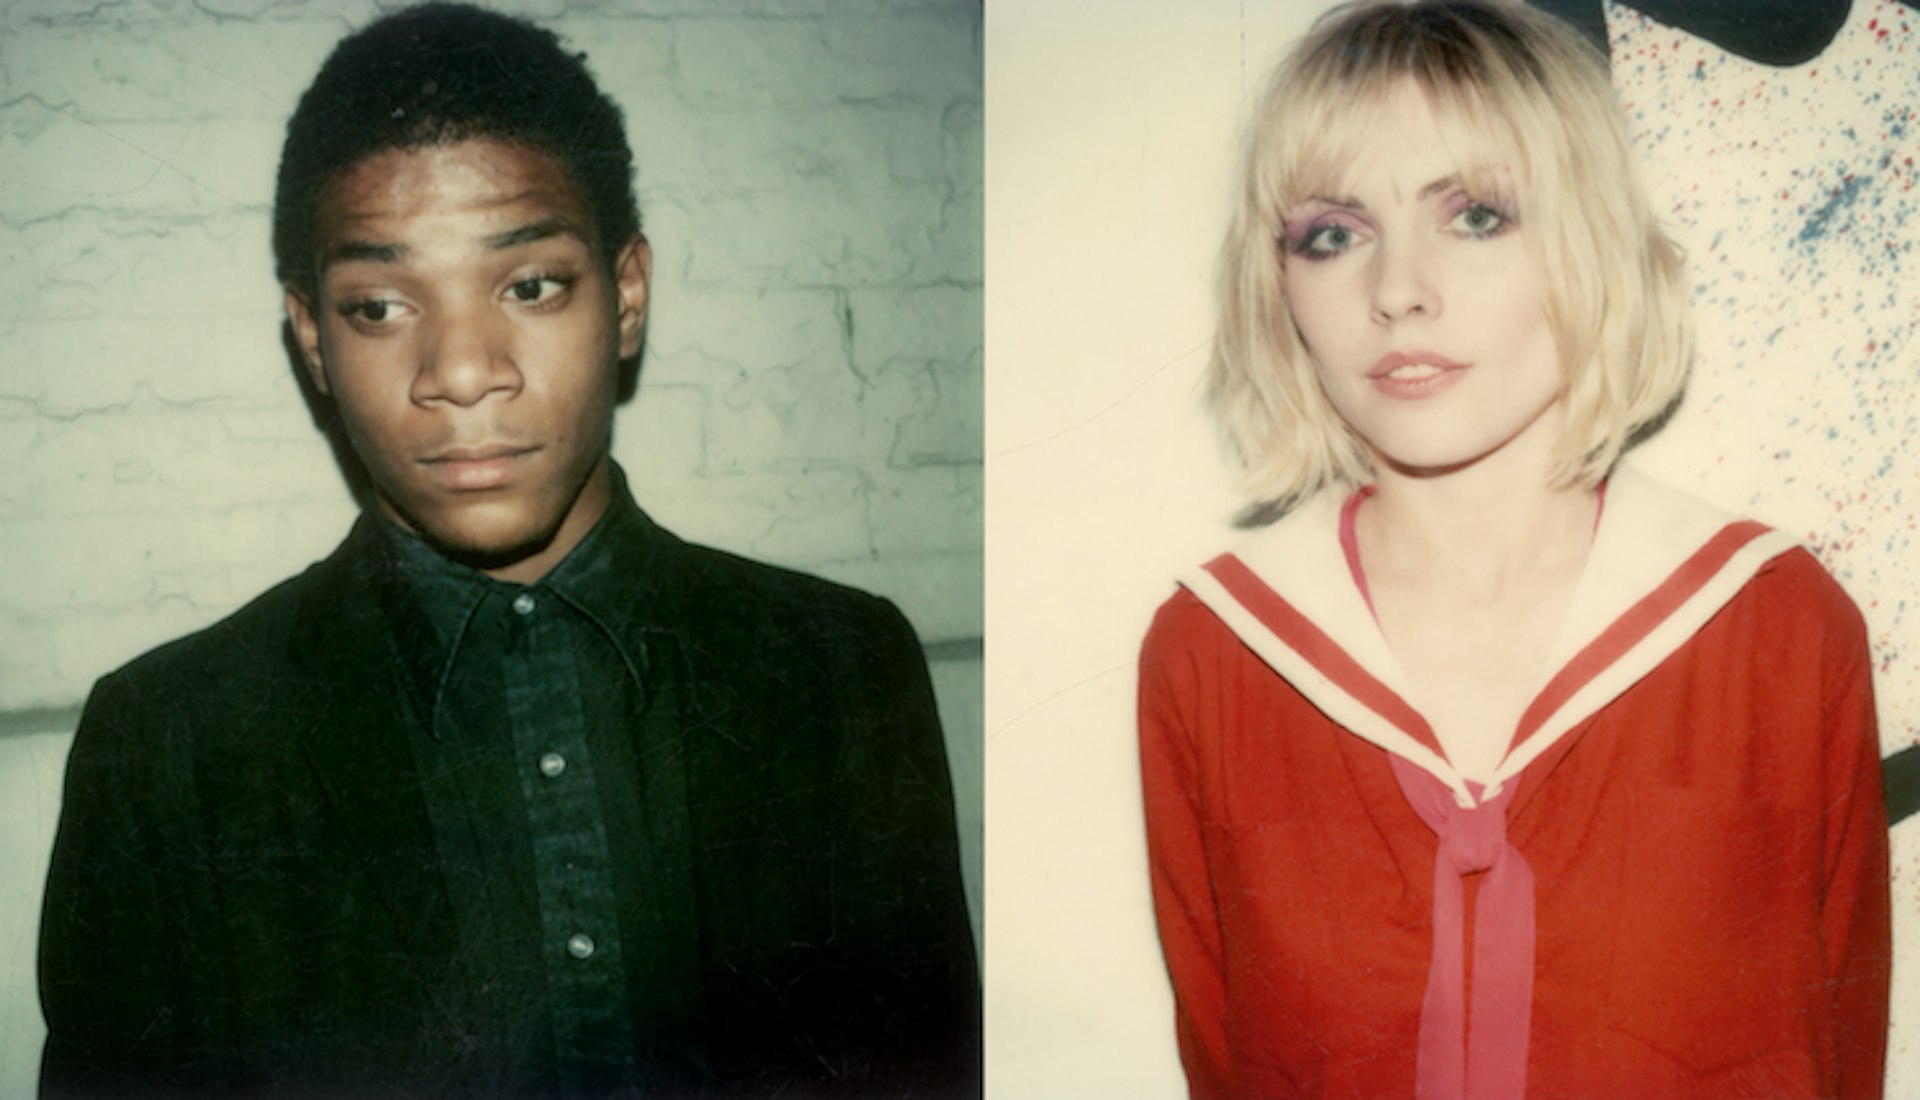 Polaroids capturing the icons of '80s New York nightlife